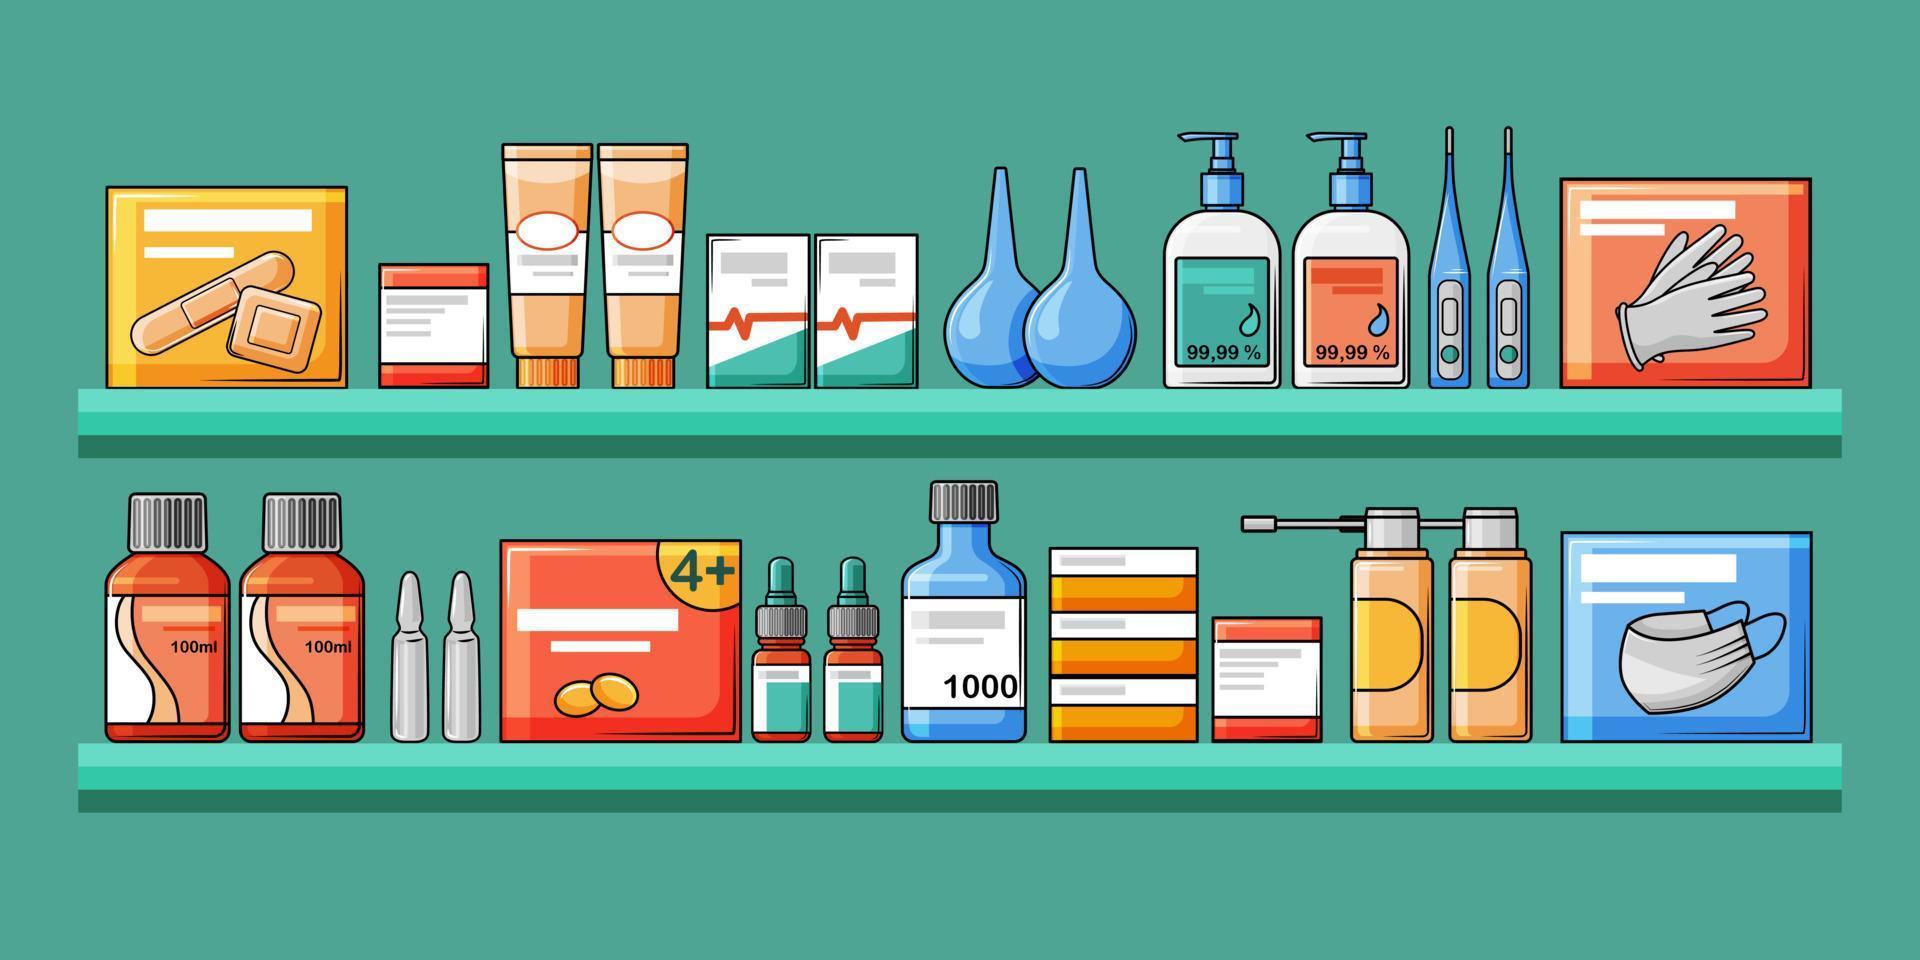 https://static.vecteezy.com/system/resources/previews/006/684/956/non_2x/interior-of-the-pharmacy-shelves-with-medical-medicines-illustration-vector.jpg